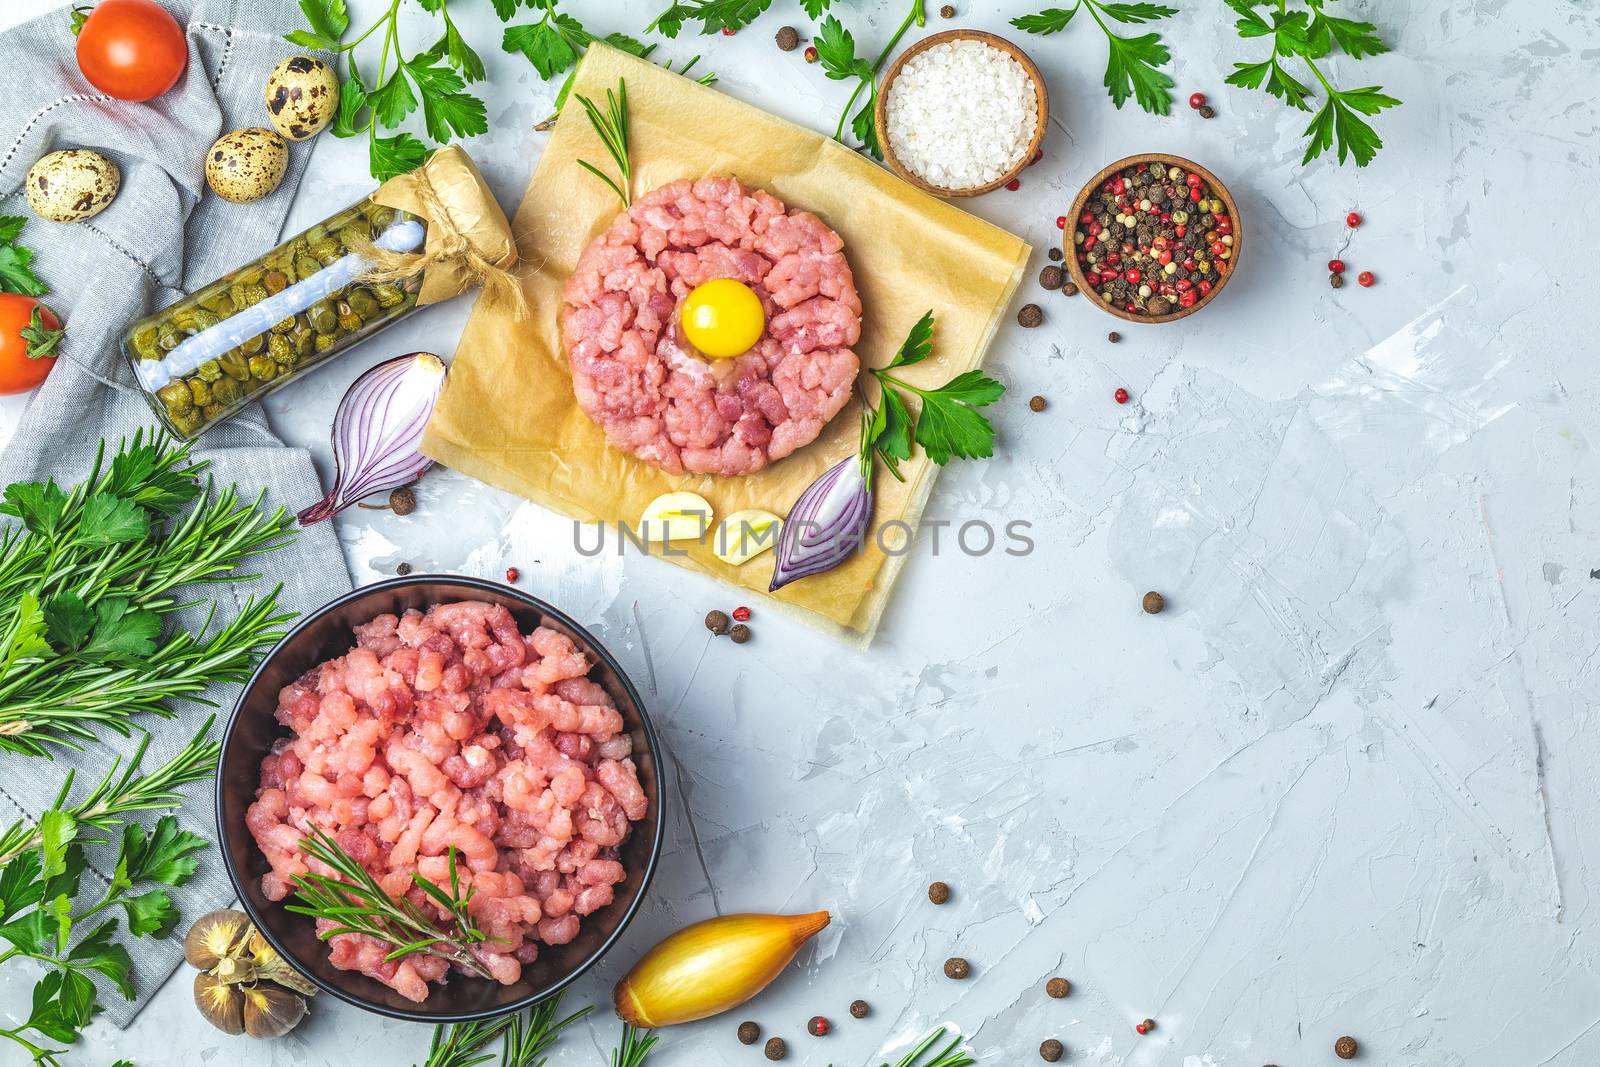 Healthy food, cooking concept. Homemade raw organic minced beef meat and steak tartare with yolk with vegetables on light gray stone concrete textured surface background. Copy space background, top view flat lay.